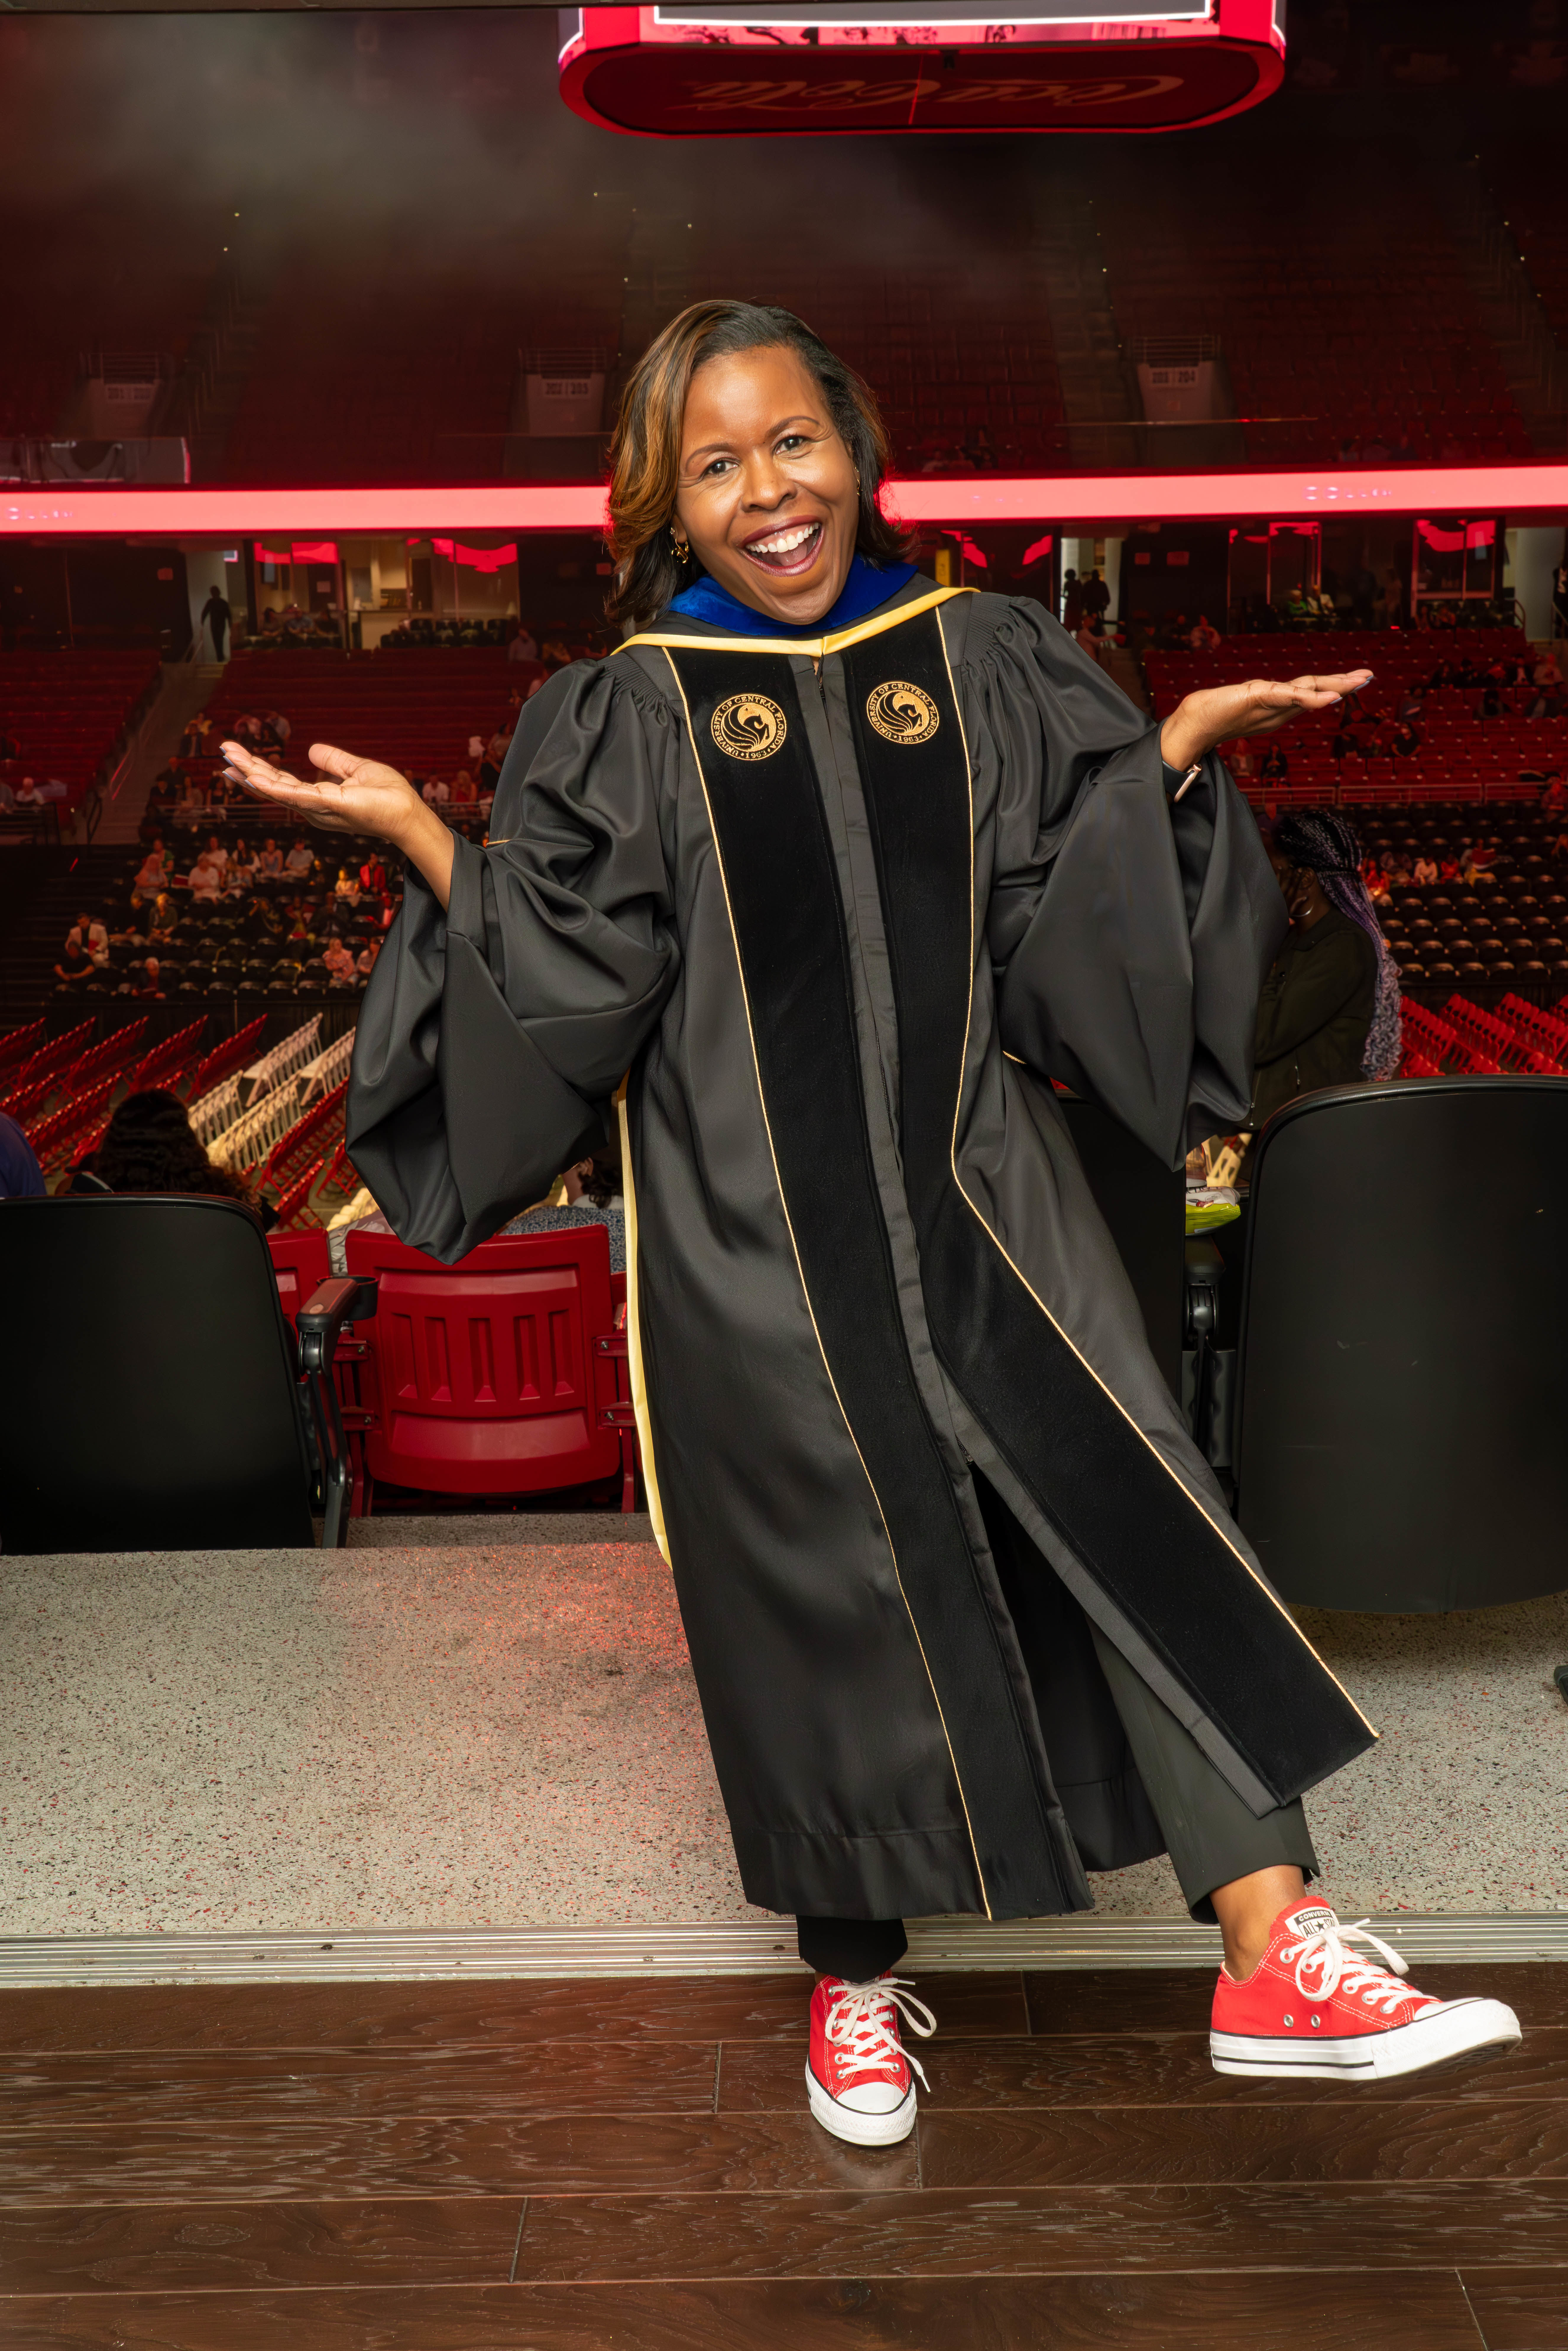 Dean Shealey poses on stage during graduation in her gown and cherry red sneakers